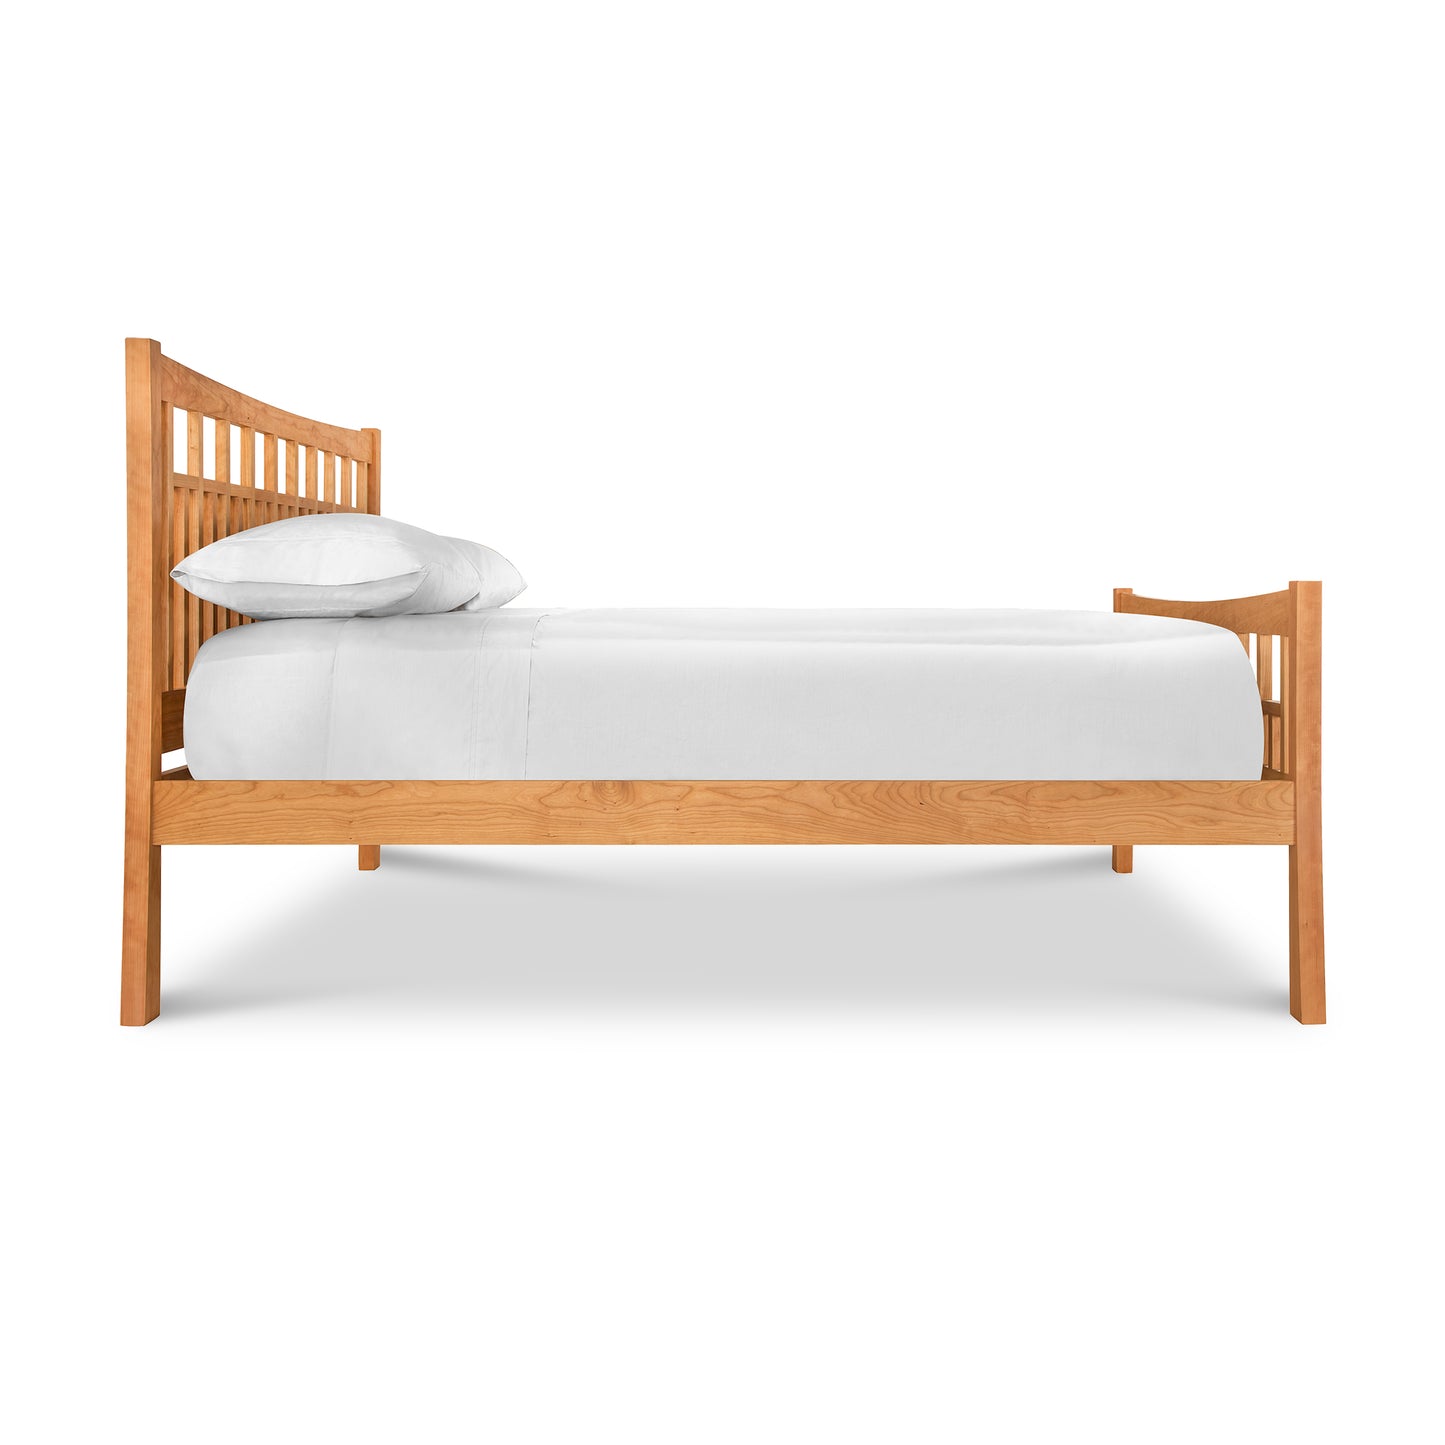 A Vermont Furniture Designs Contemporary Craftsman High Footboard Bed with white bedding and a pillow against a white background, featuring an eco-friendly oil finish.